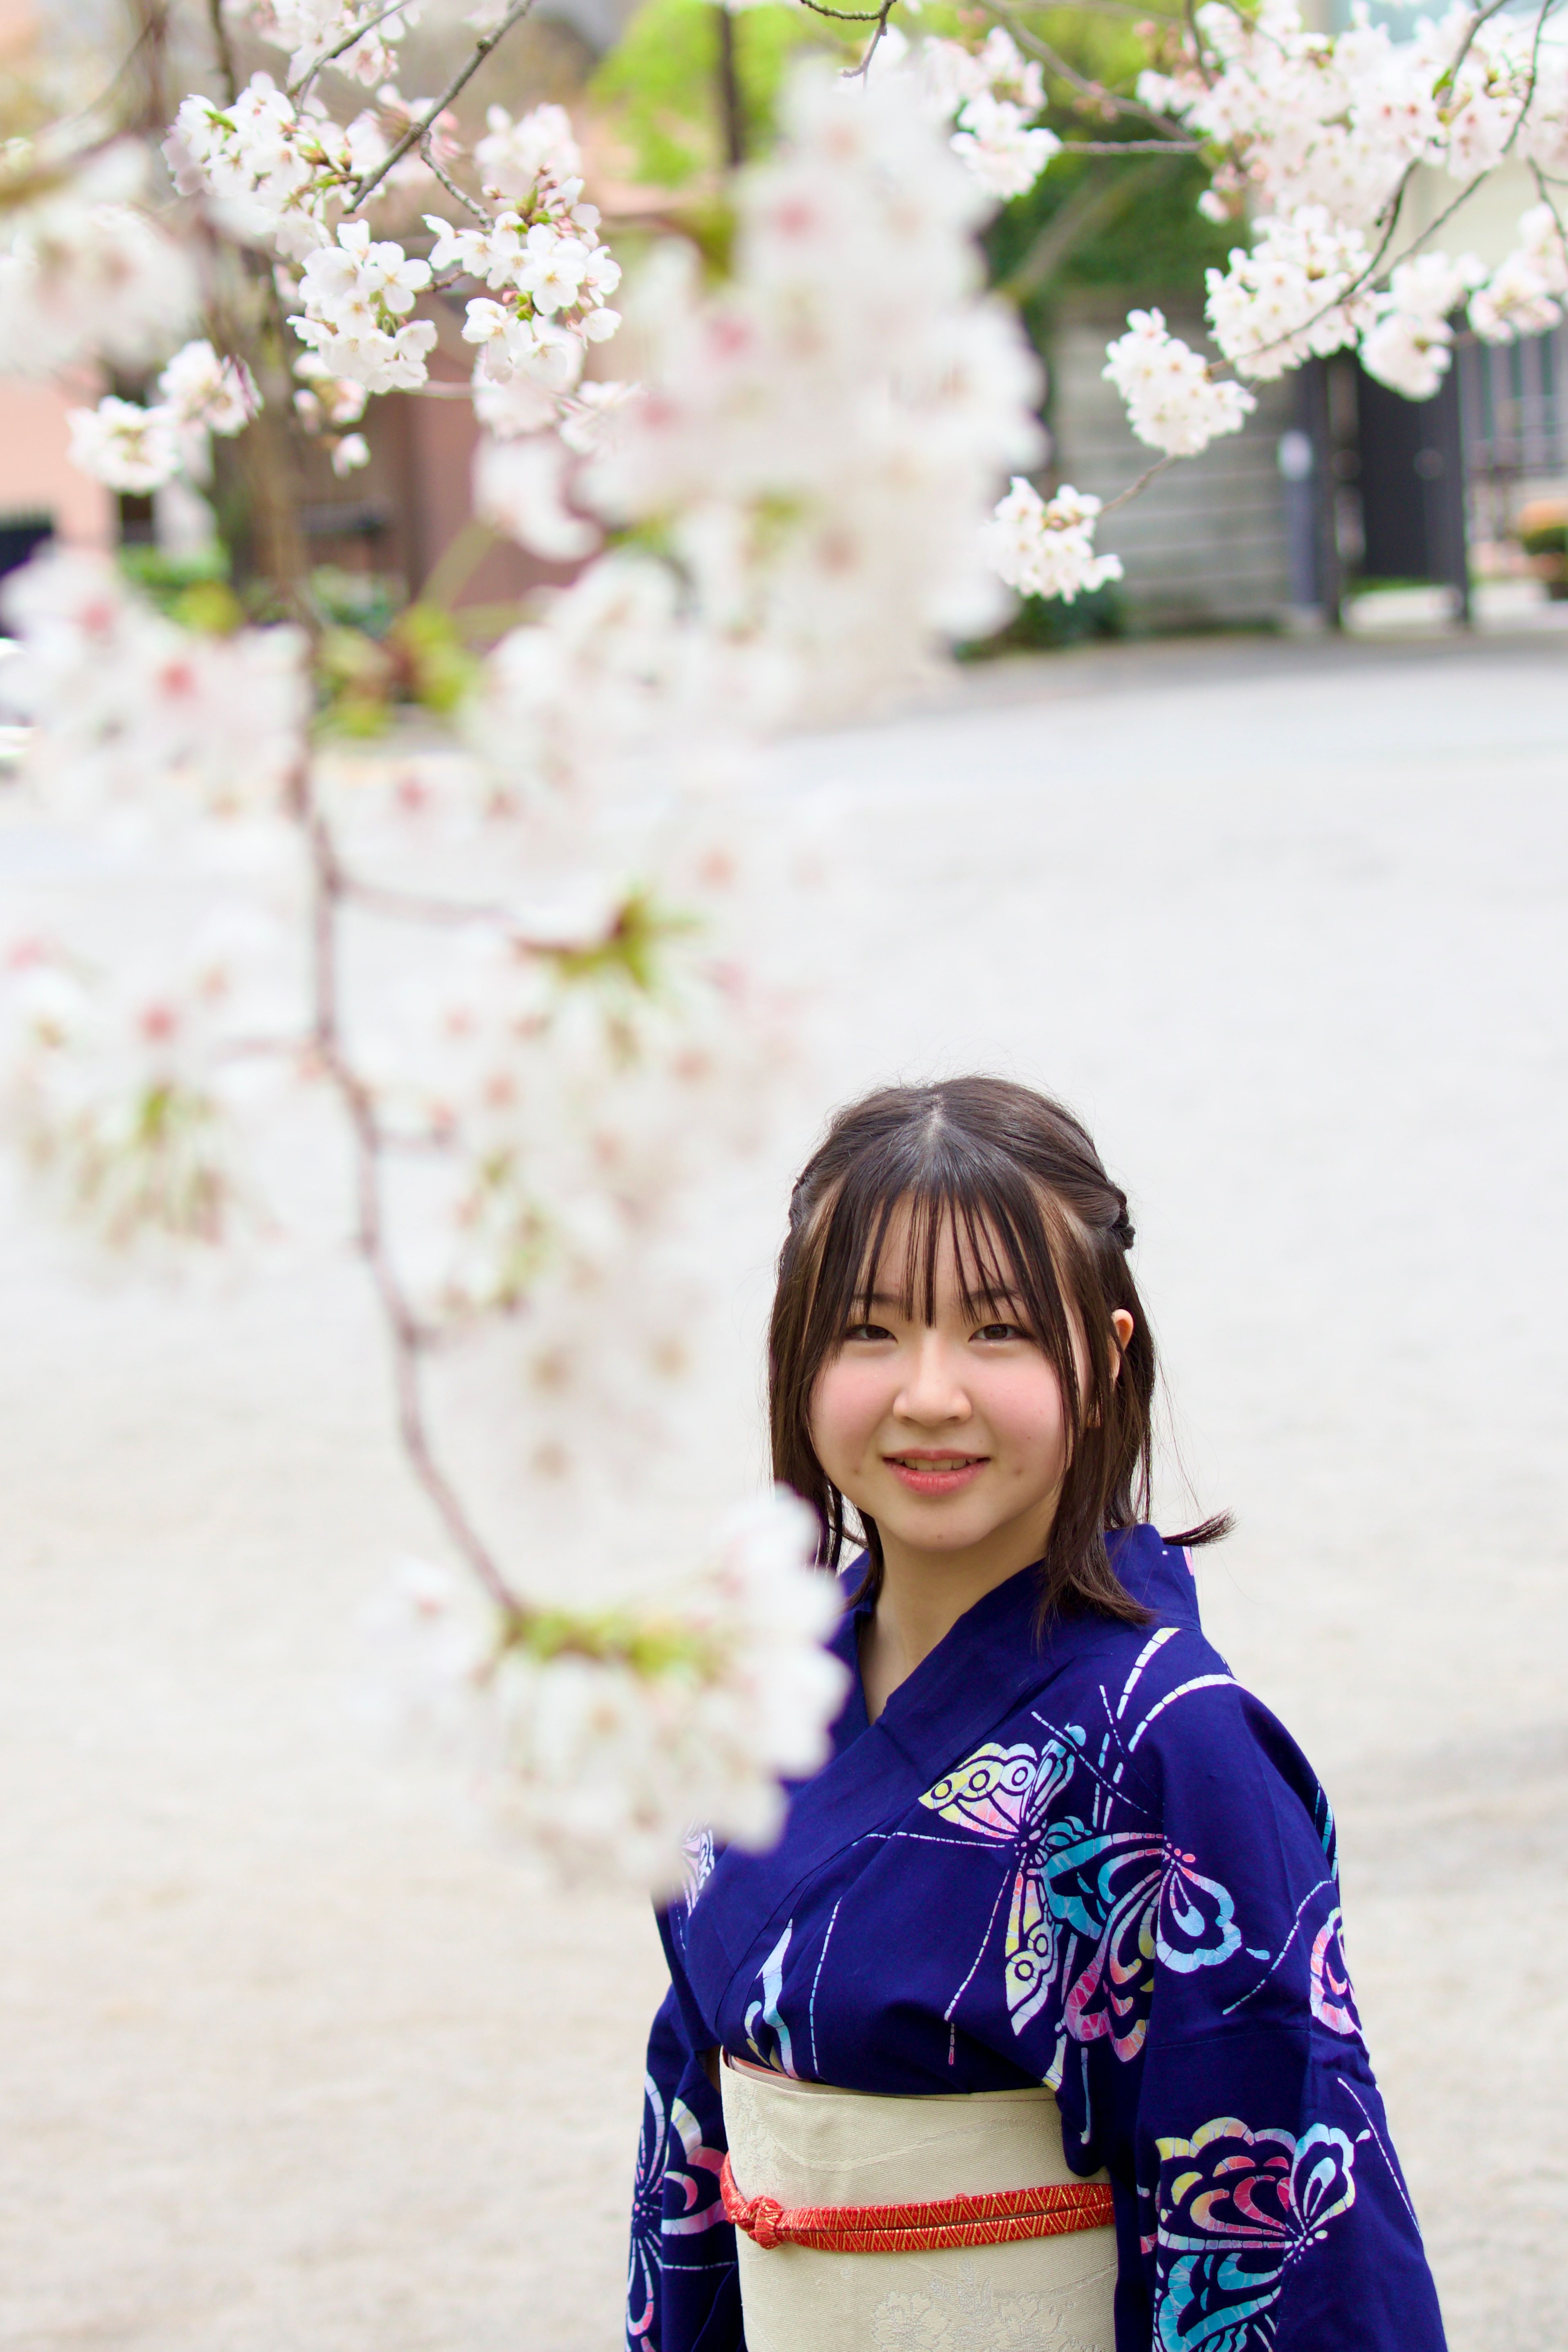 Experience Tea Ceremony while wearing a private kimono in Asakusa. Includes portrait shooting with a single-lens reflex camera